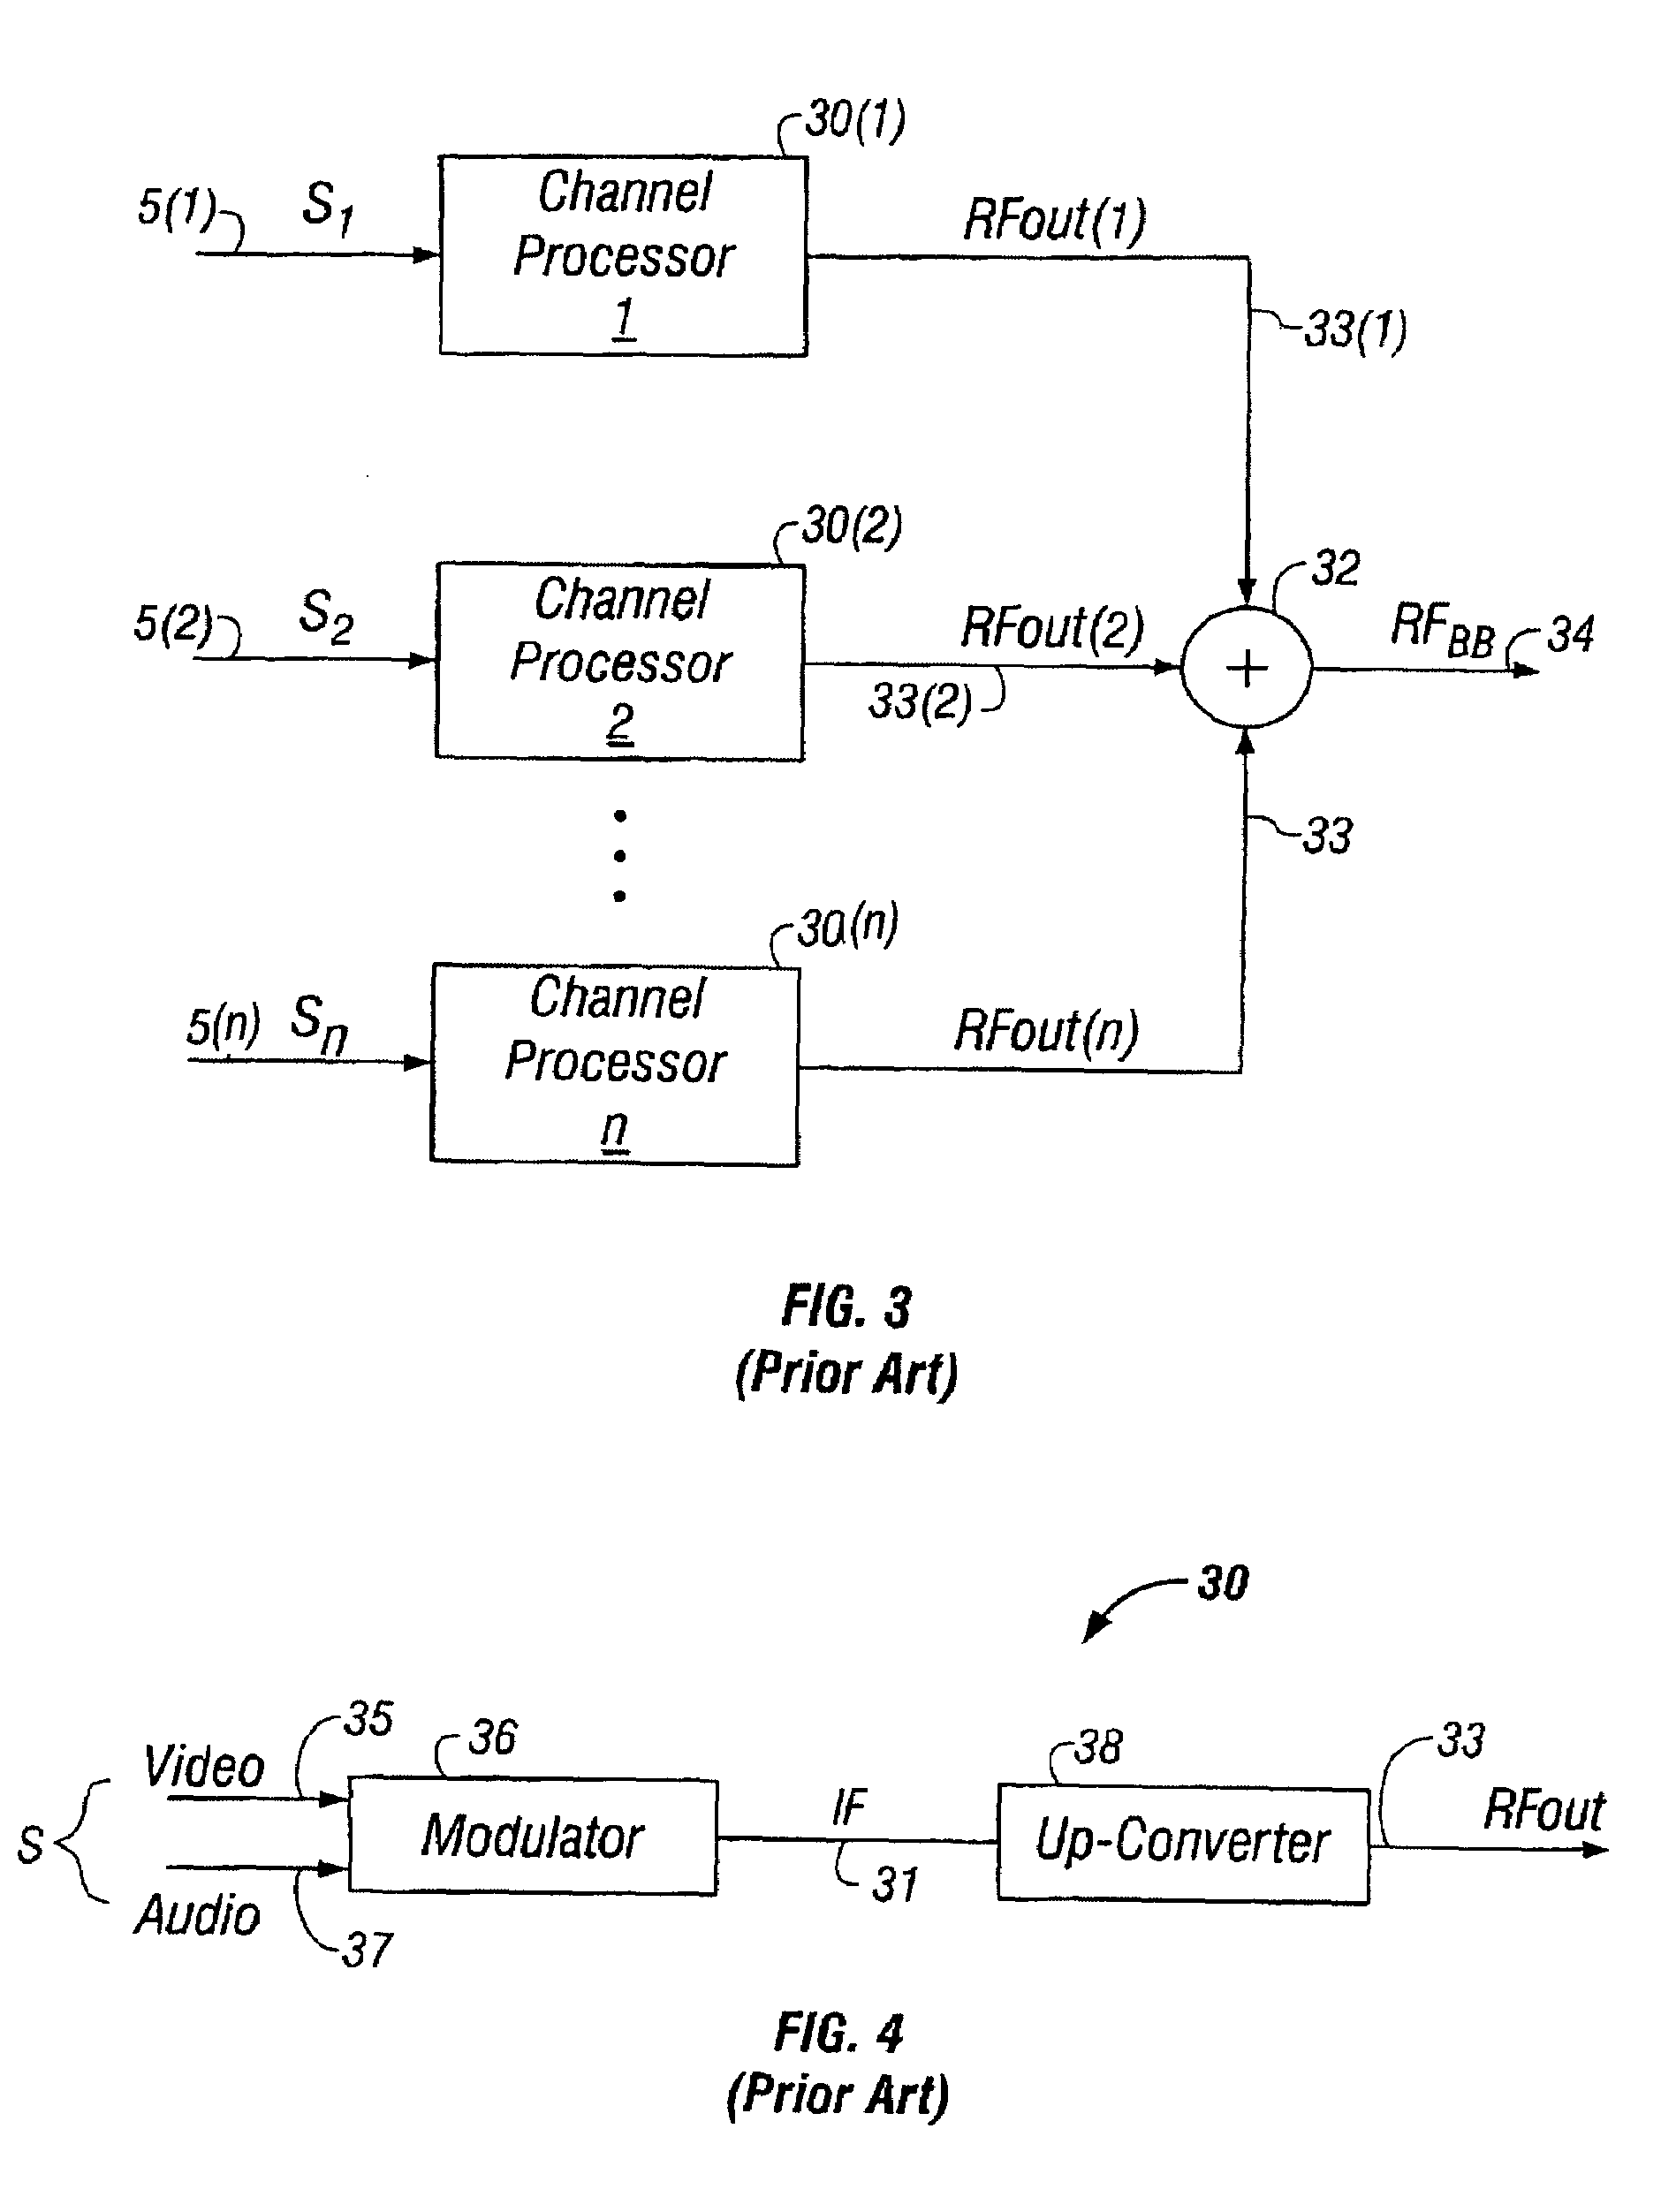 Agile frequency converter for multichannel systems using IF-RF level exhange and tunable filters